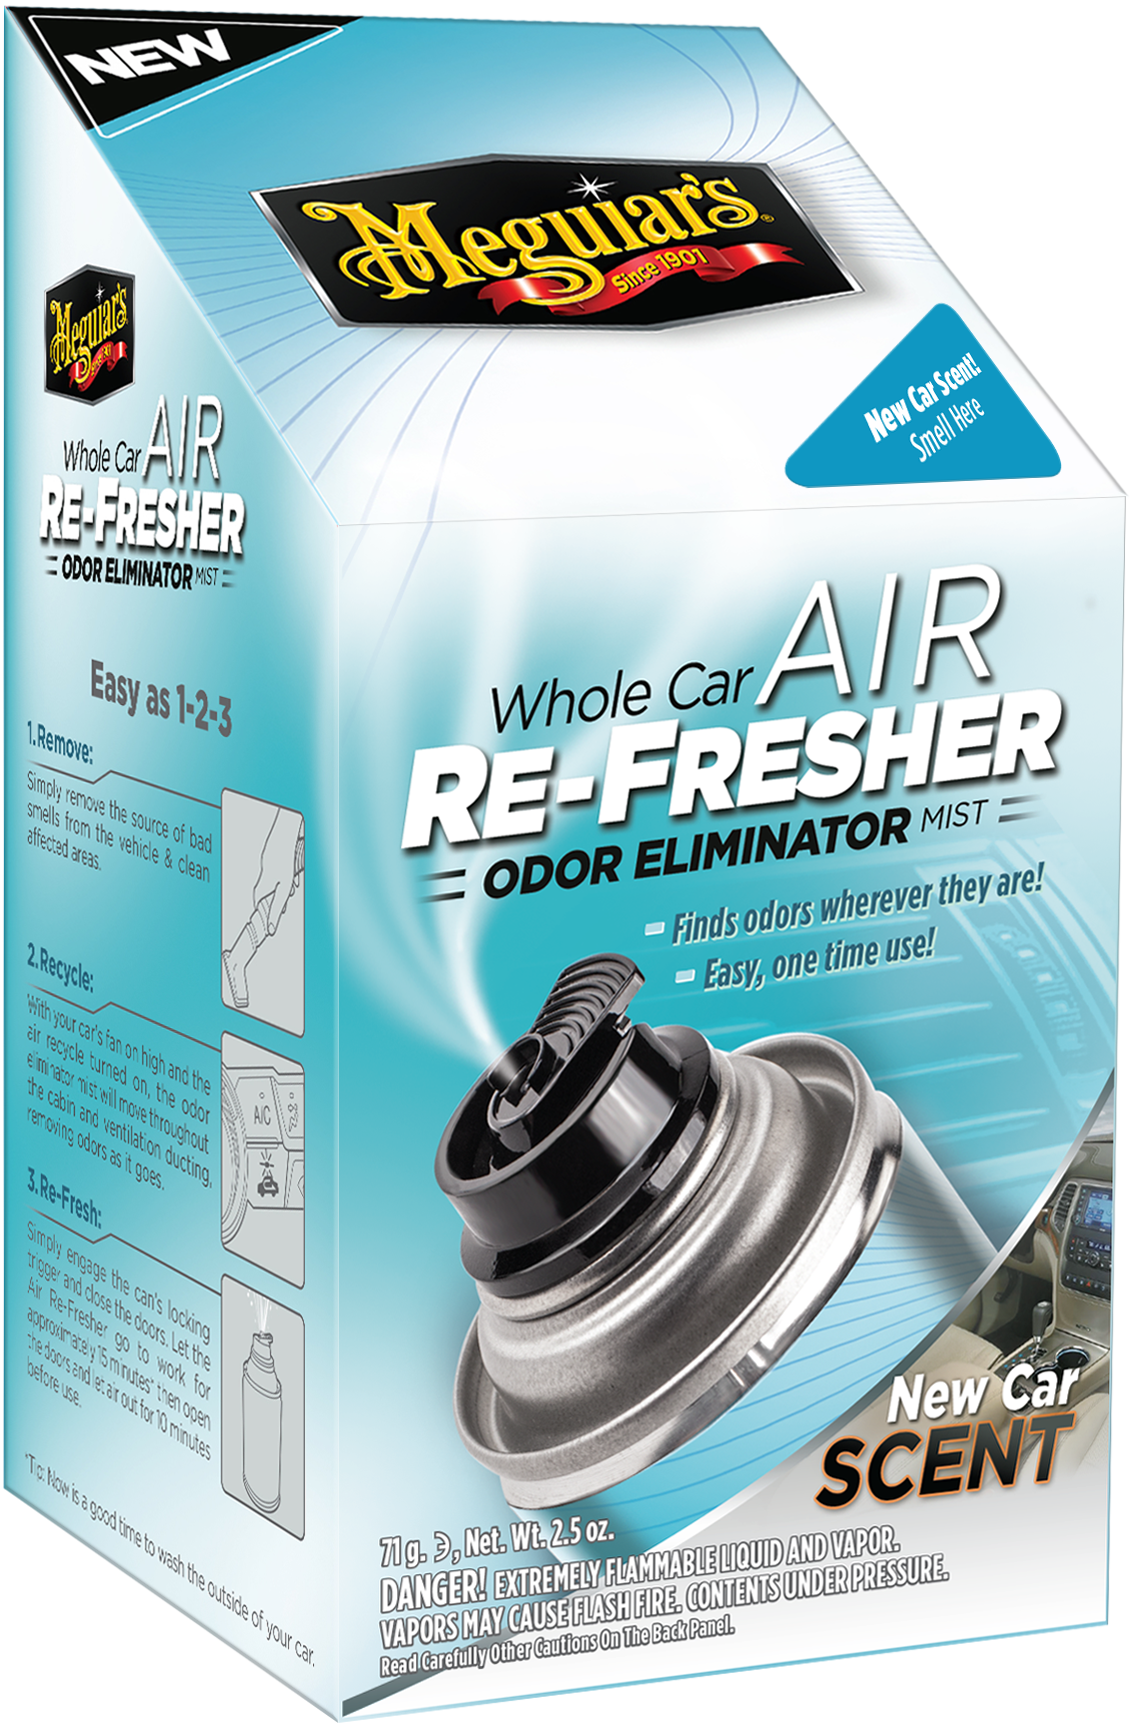 Air Re-Fresher, New Car Scent